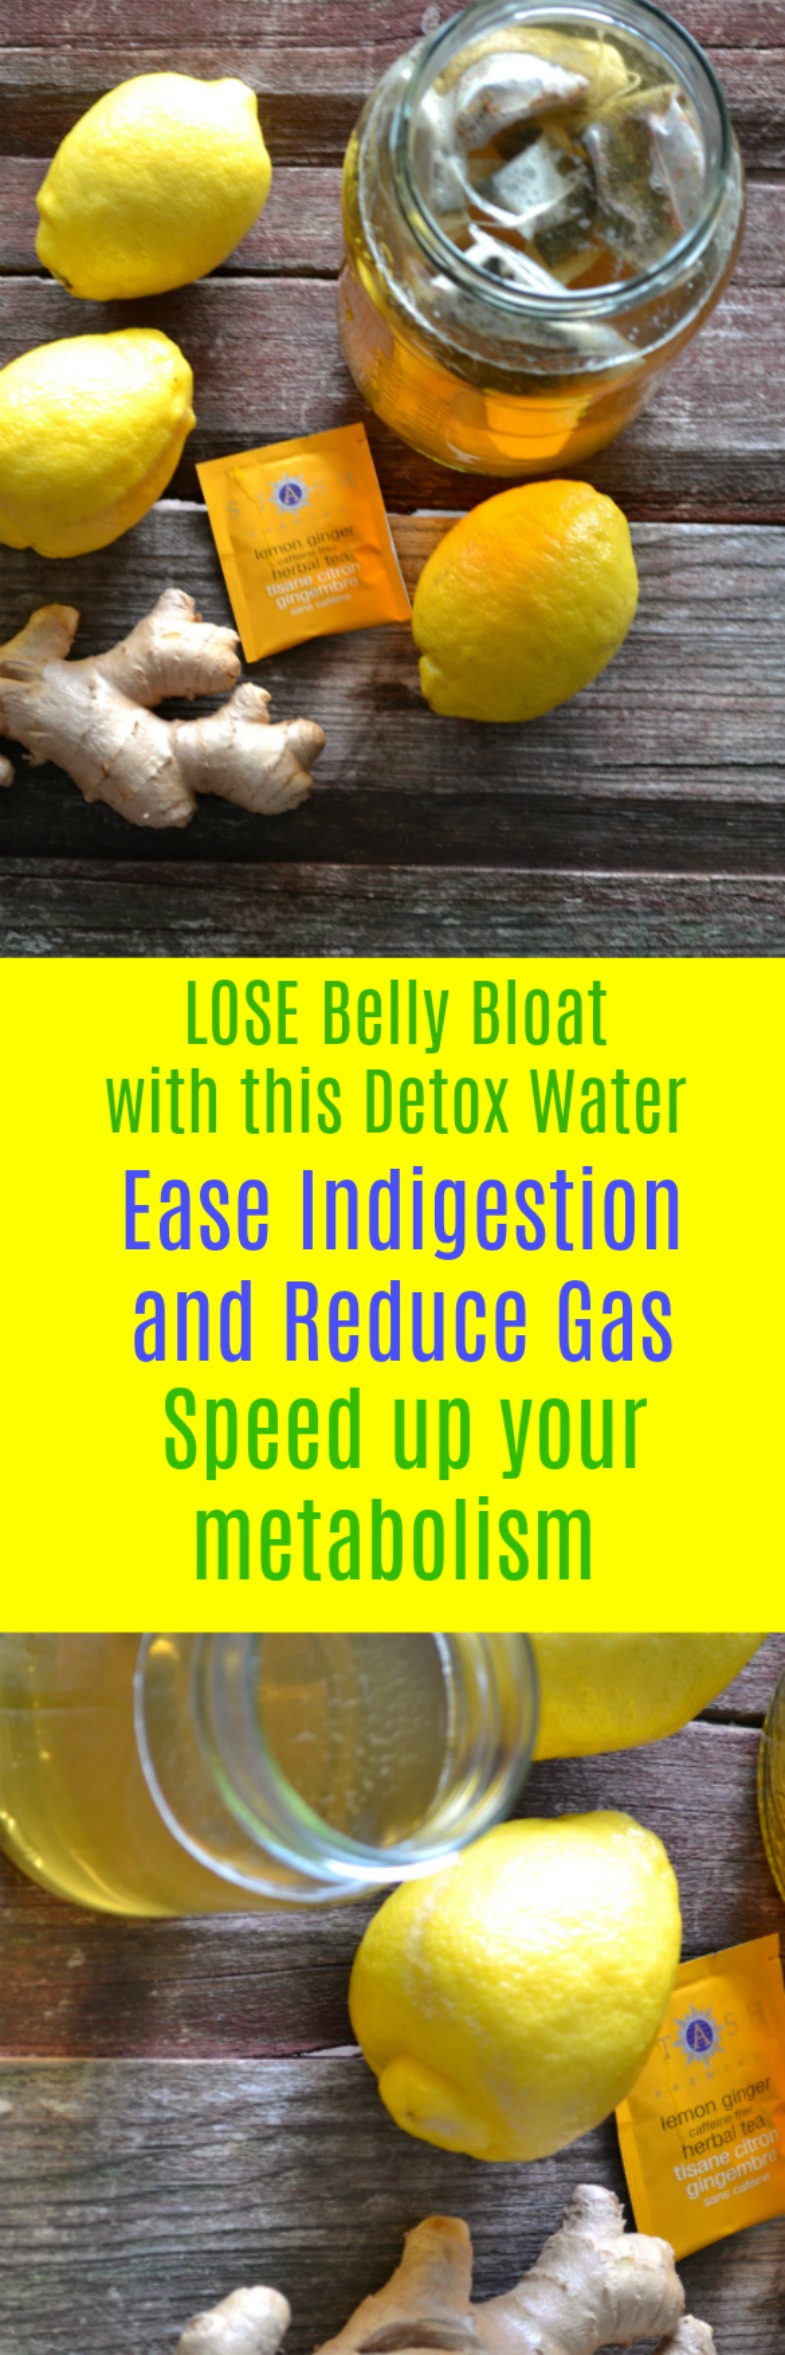 Lose Belly Bloat with this Detox Water, Ease Indegestion and Reduce Gas!